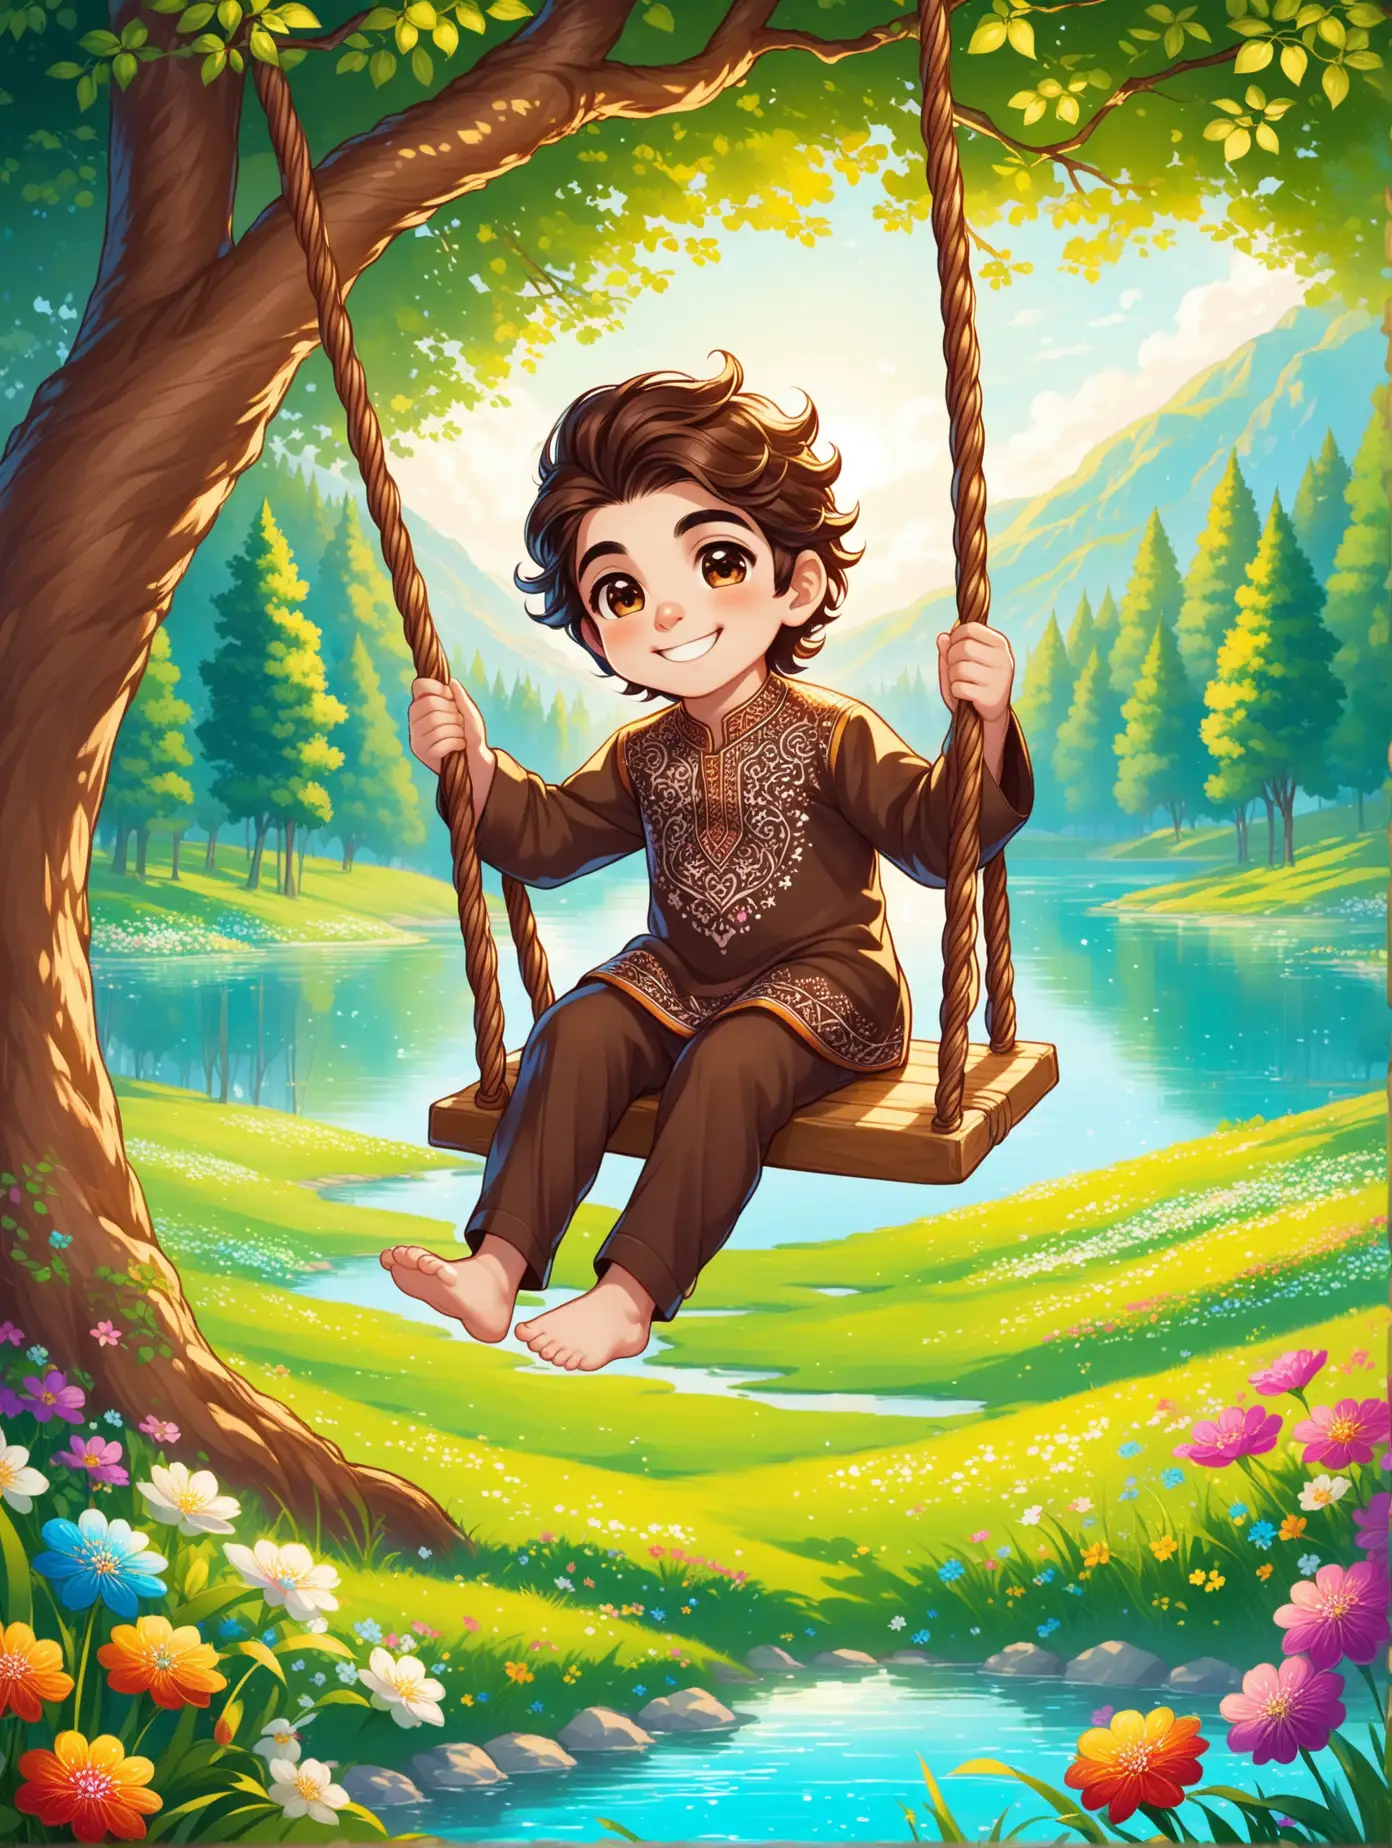 Persian Boy Swinging in Spring Forest by the Lake